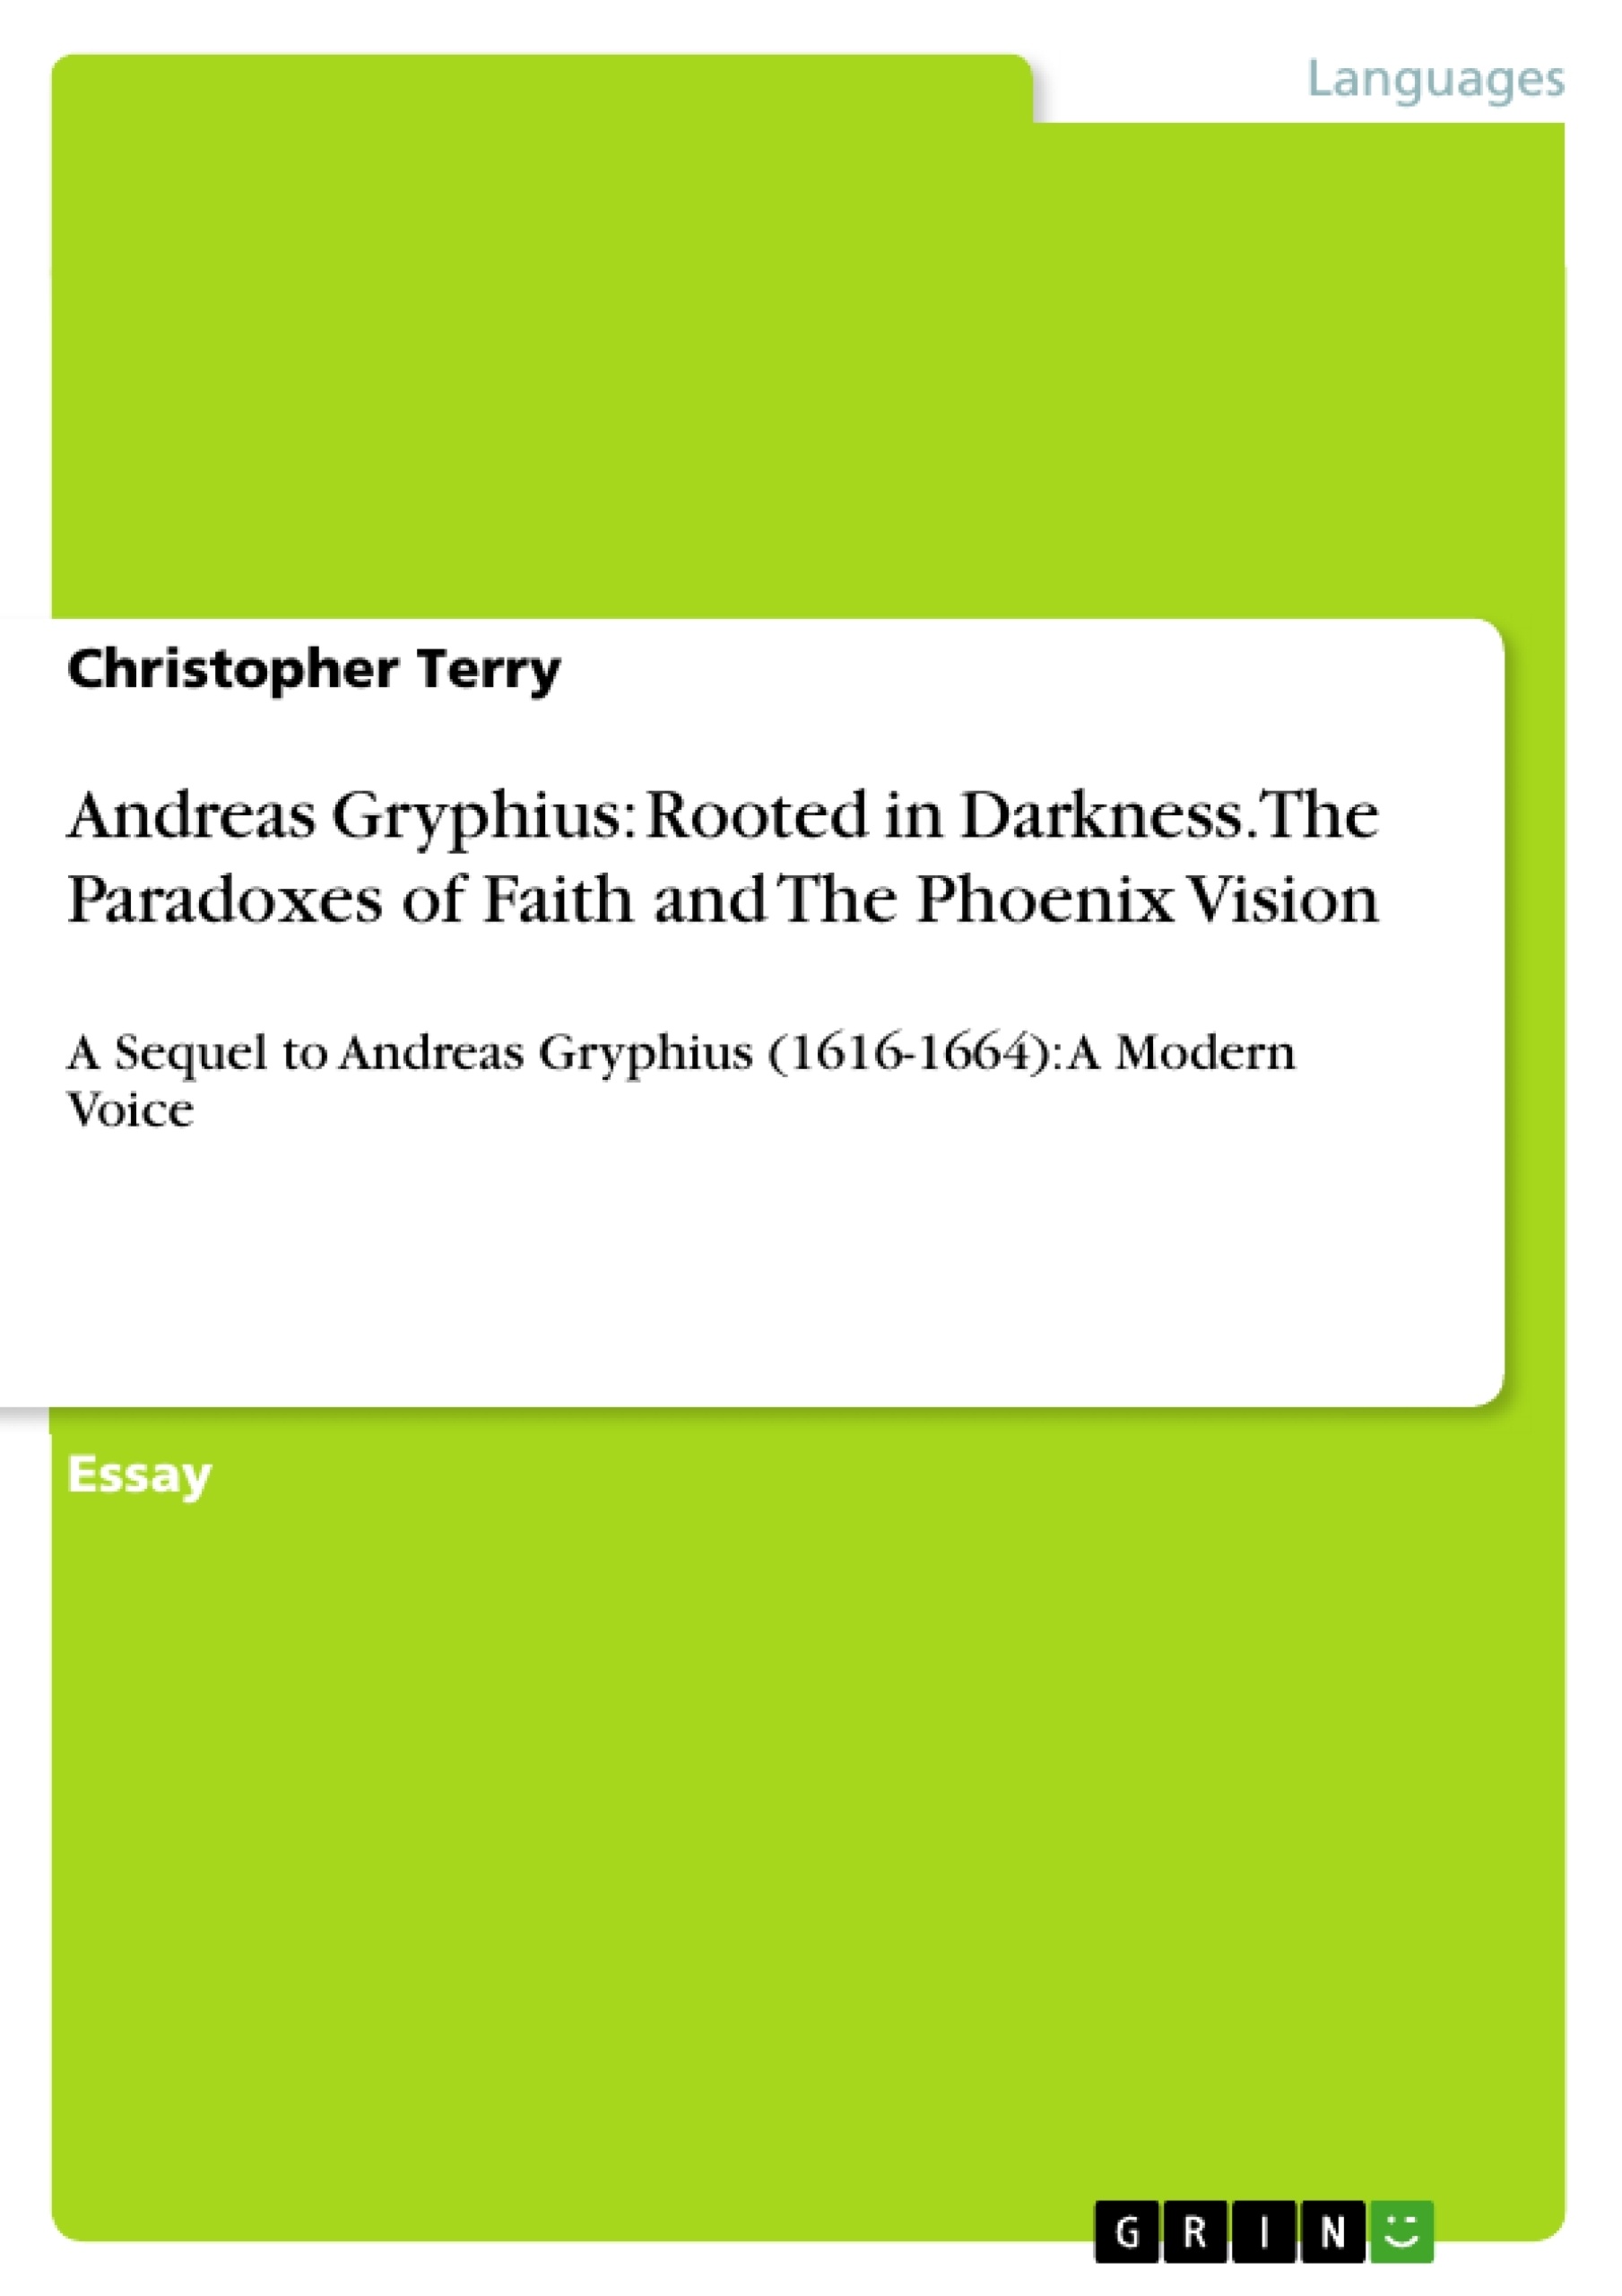 Title: Andreas Gryphius: Rooted in Darkness. The Paradoxes of Faith and The Phoenix Vision